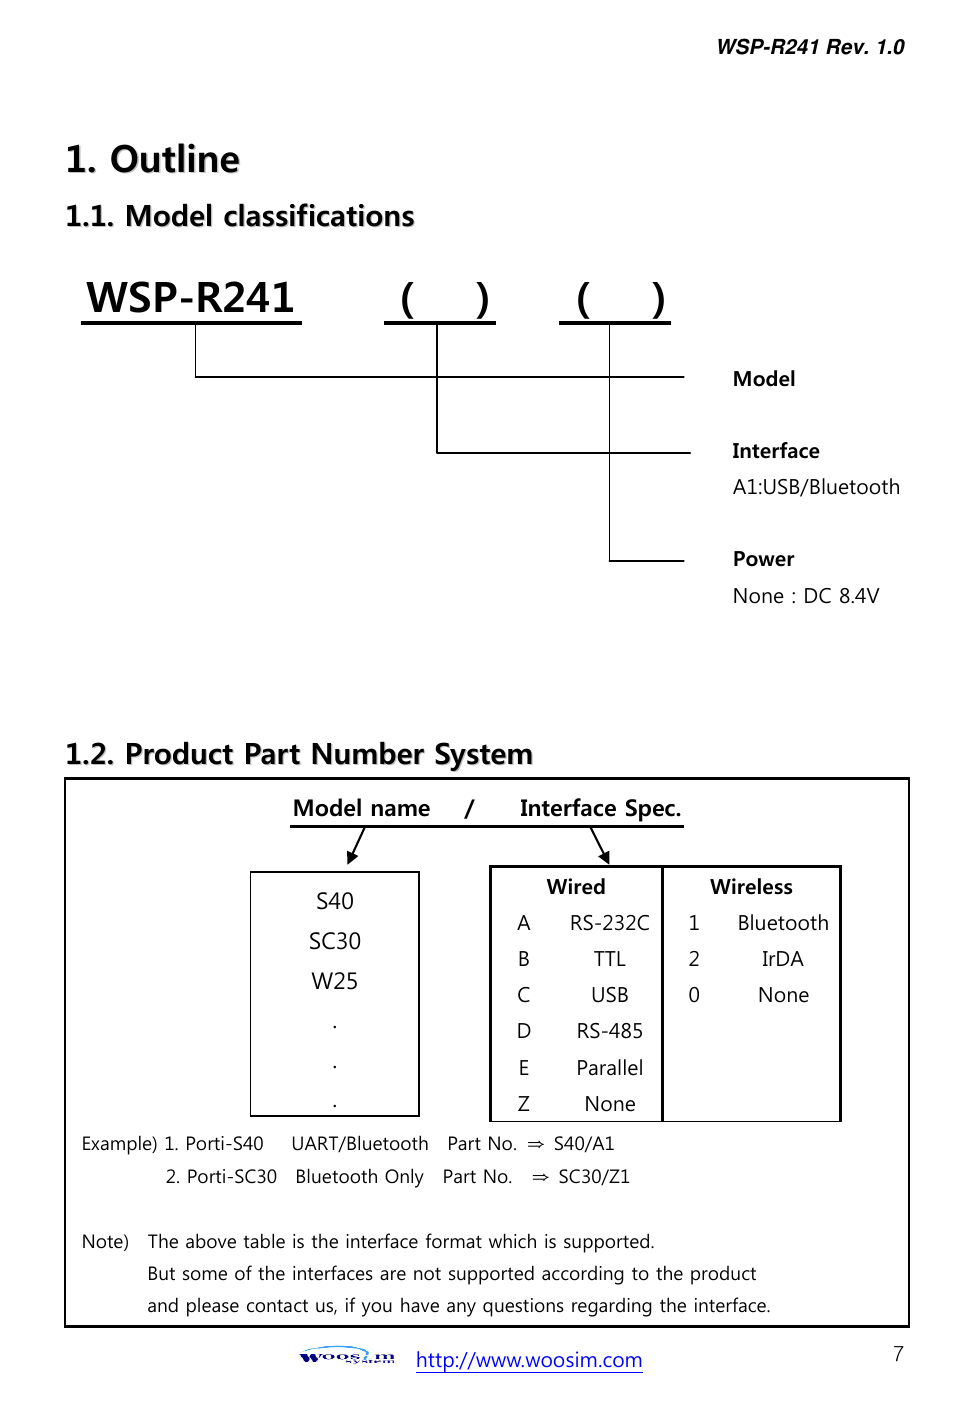 WSP-R241 Rev. 1.0    http://www.woosim.com 7 11..  OOuuttlliinnee  11..11..  MMooddeell  ccllaassssiiffiiccaattiioonnss               11..22..  PPrroodduucctt  PPaarrtt  NNuummbbeerr  SSyysstteemm               WSP-R241        (      )        (      )           Model    Interface A1:USB/Bluetooth              Power                                                                 None : DC 8.4V  Model name    /       Interface Spec.         Example) 1. Porti-S40     UART/Bluetooth   Part No.  ⇒ S40/A1               2. Porti-SC30   Bluetooth Only   Part No.   ⇒  SC30/Z1  Note)   The above table is the interface format which is supported. But some of the interfaces are not supported according to the product and please contact us, if you have any questions regarding the interface.  S40 SC30 W25 . . .  Wired Wireless A RS-232C 1 Bluetooth B TTL 2 IrDA C USB 0 None D RS-485   E Parallel   Z None    